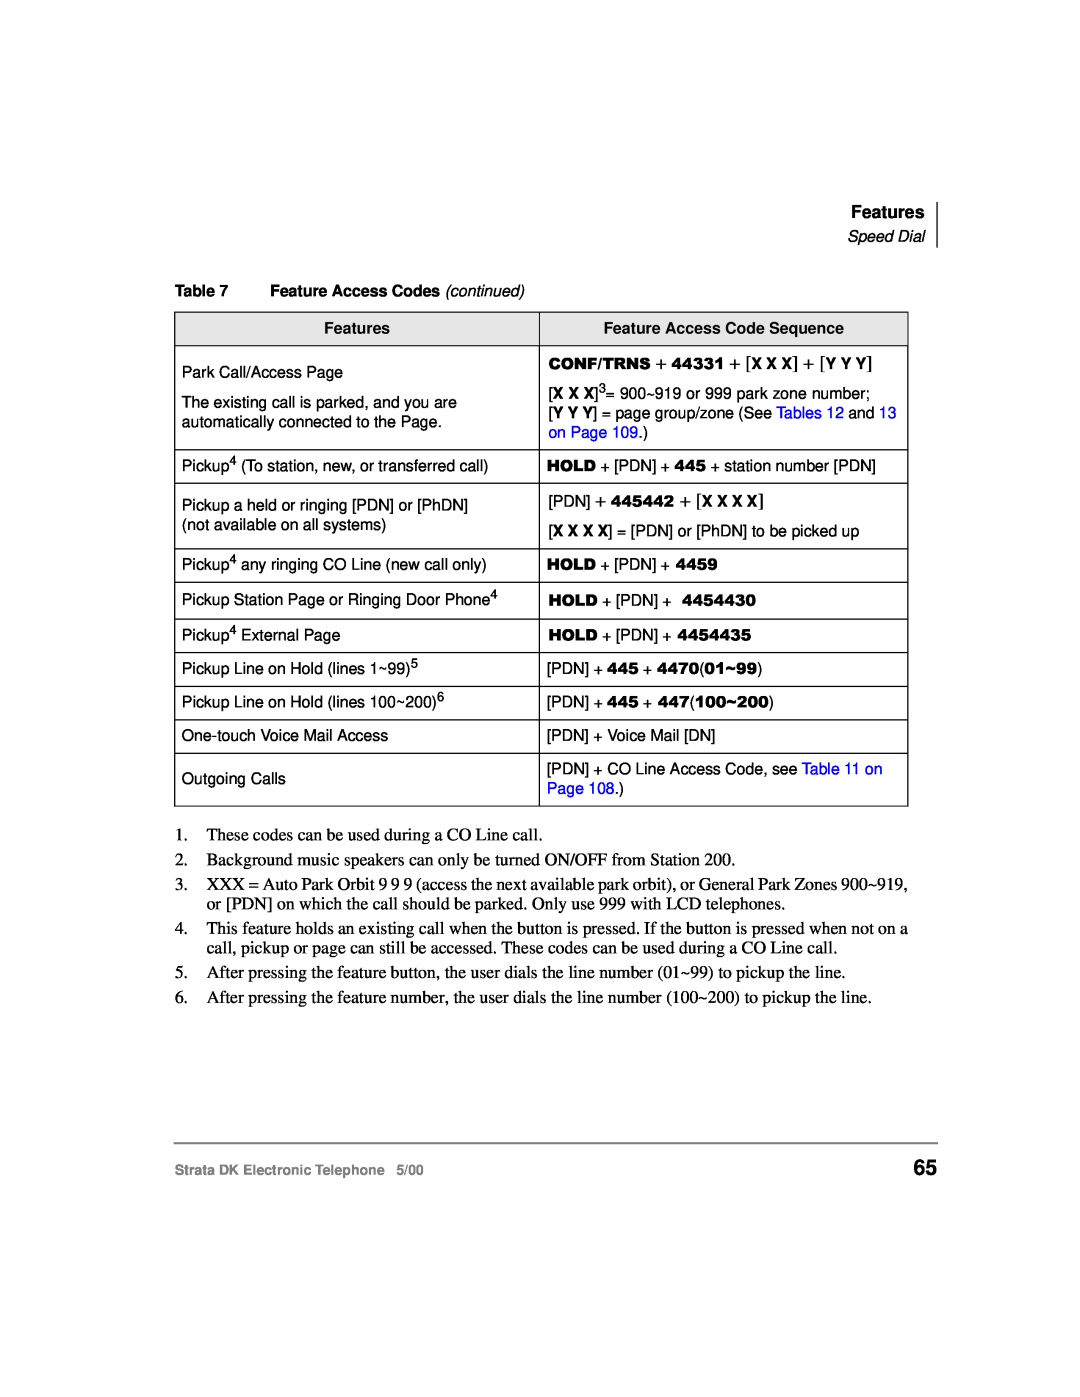 Toshiba Strata DK manual Features, These codes can be used during a CO Line call 